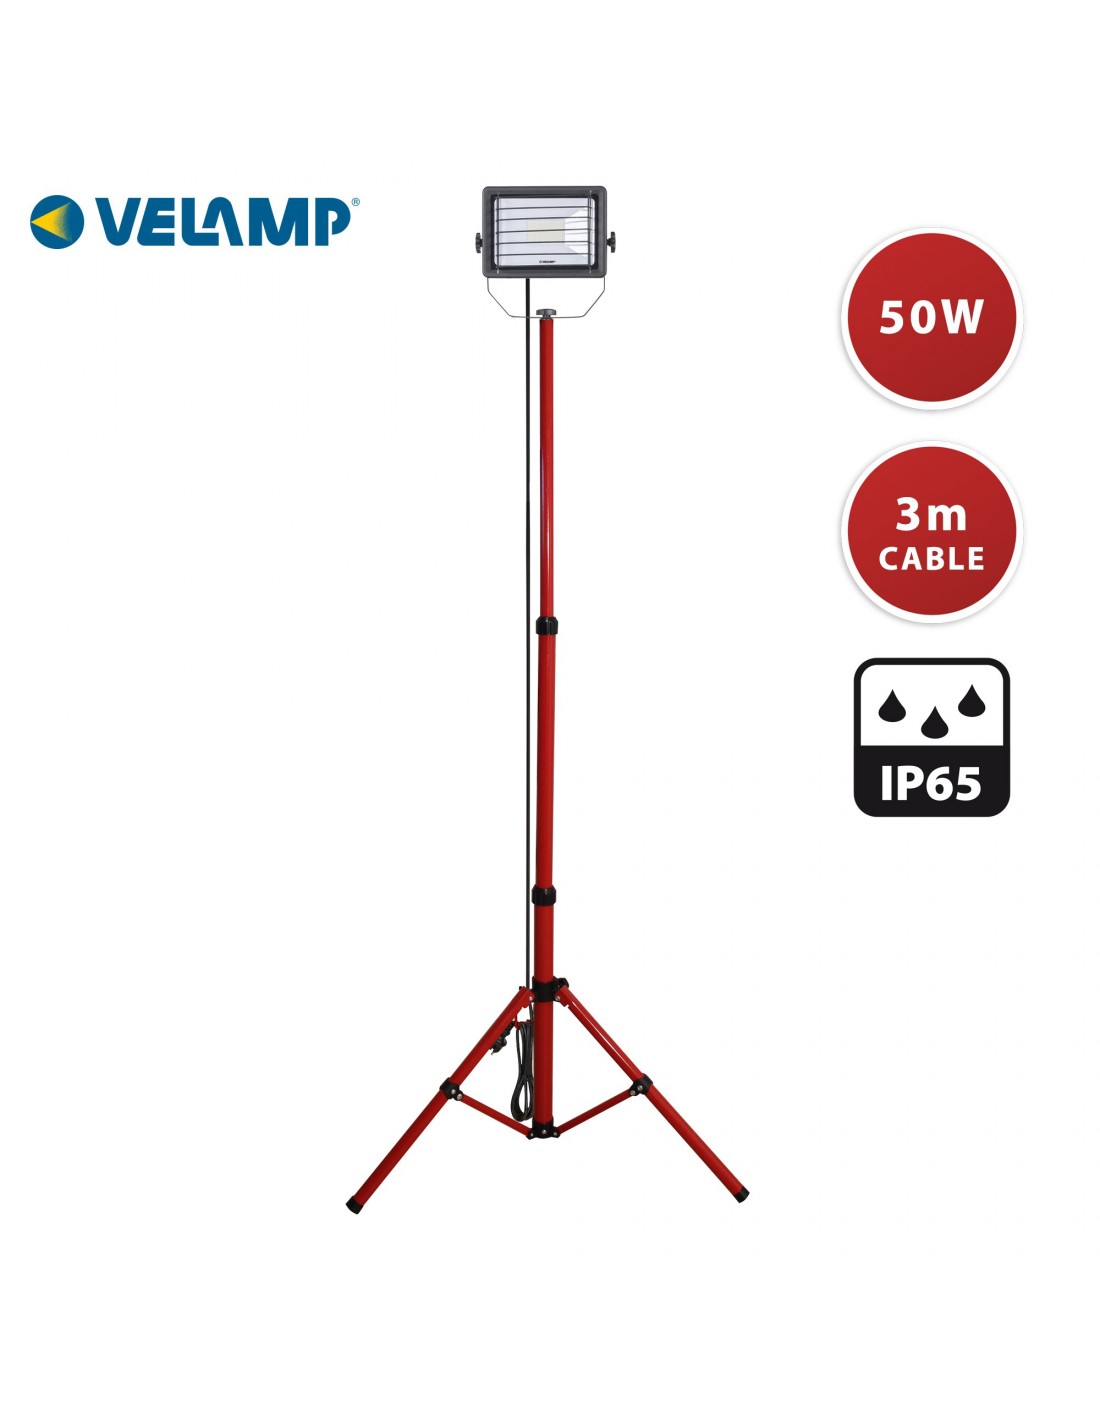 WAINGRO: 50W SMD LED projector, IP65, with tripod and 3mt cable VEL IS746-50W